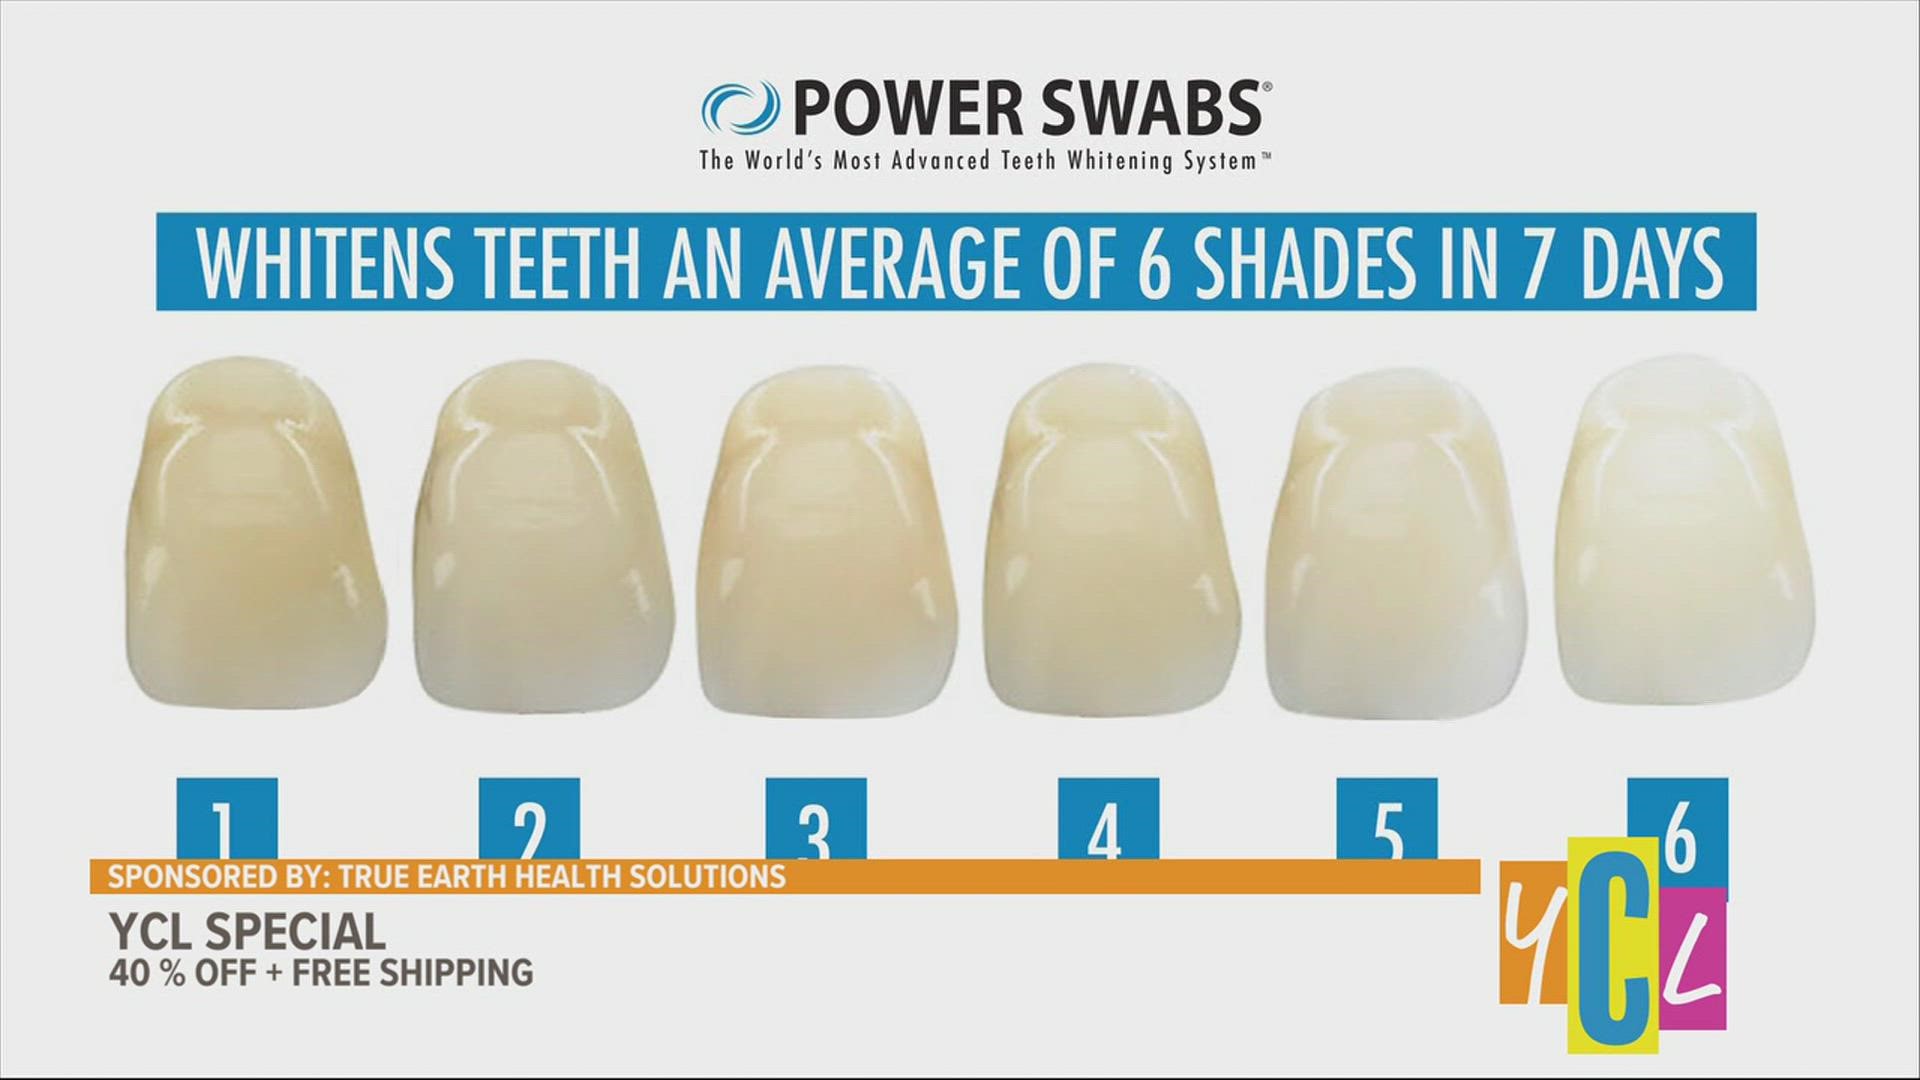 Power Swabs wants to have you looking good this season with their teeth whitening system.
This segment paid for by True Earth Health Solutions.